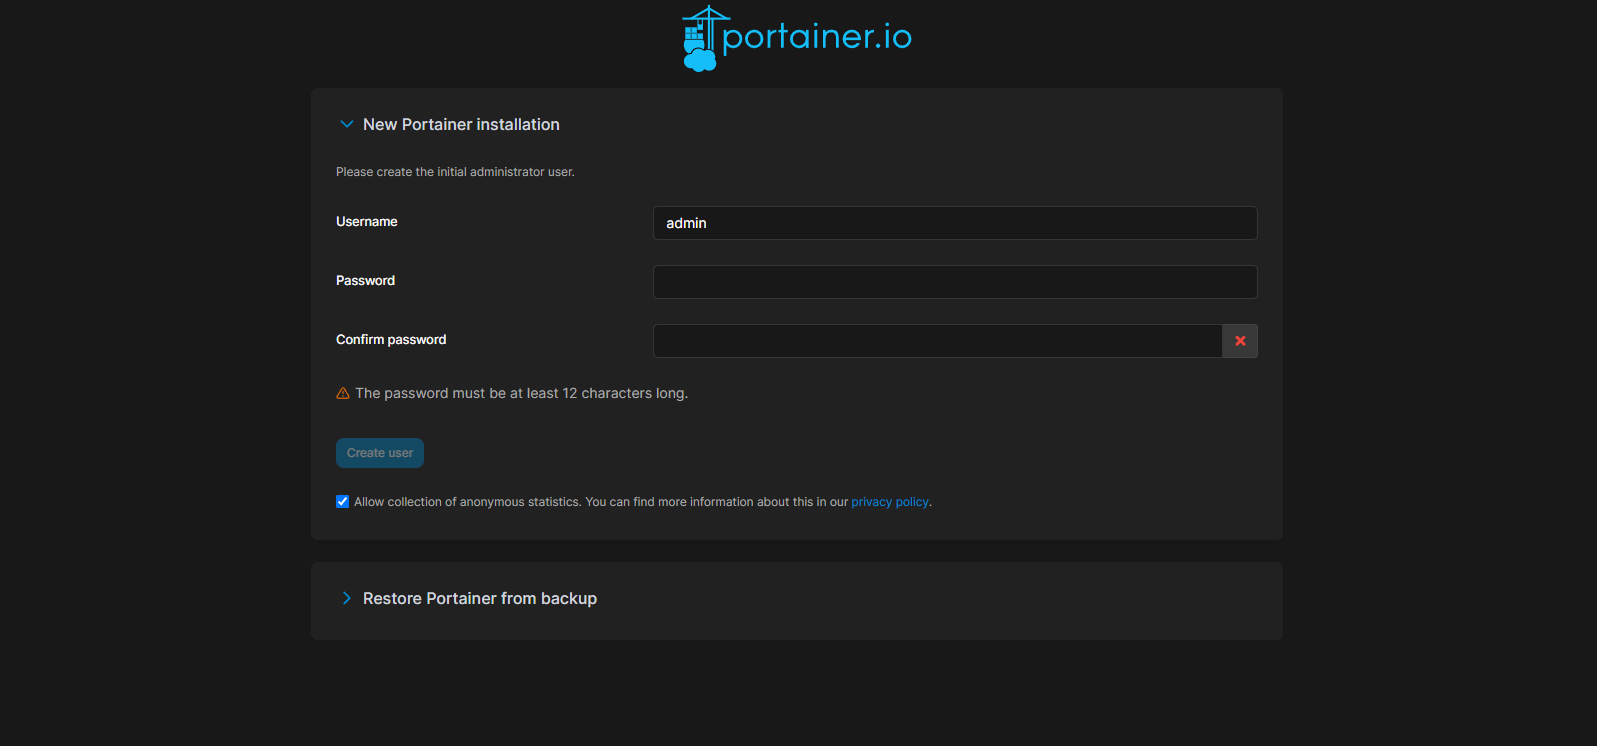 Portainer - A Easy way to Create and Manage Container